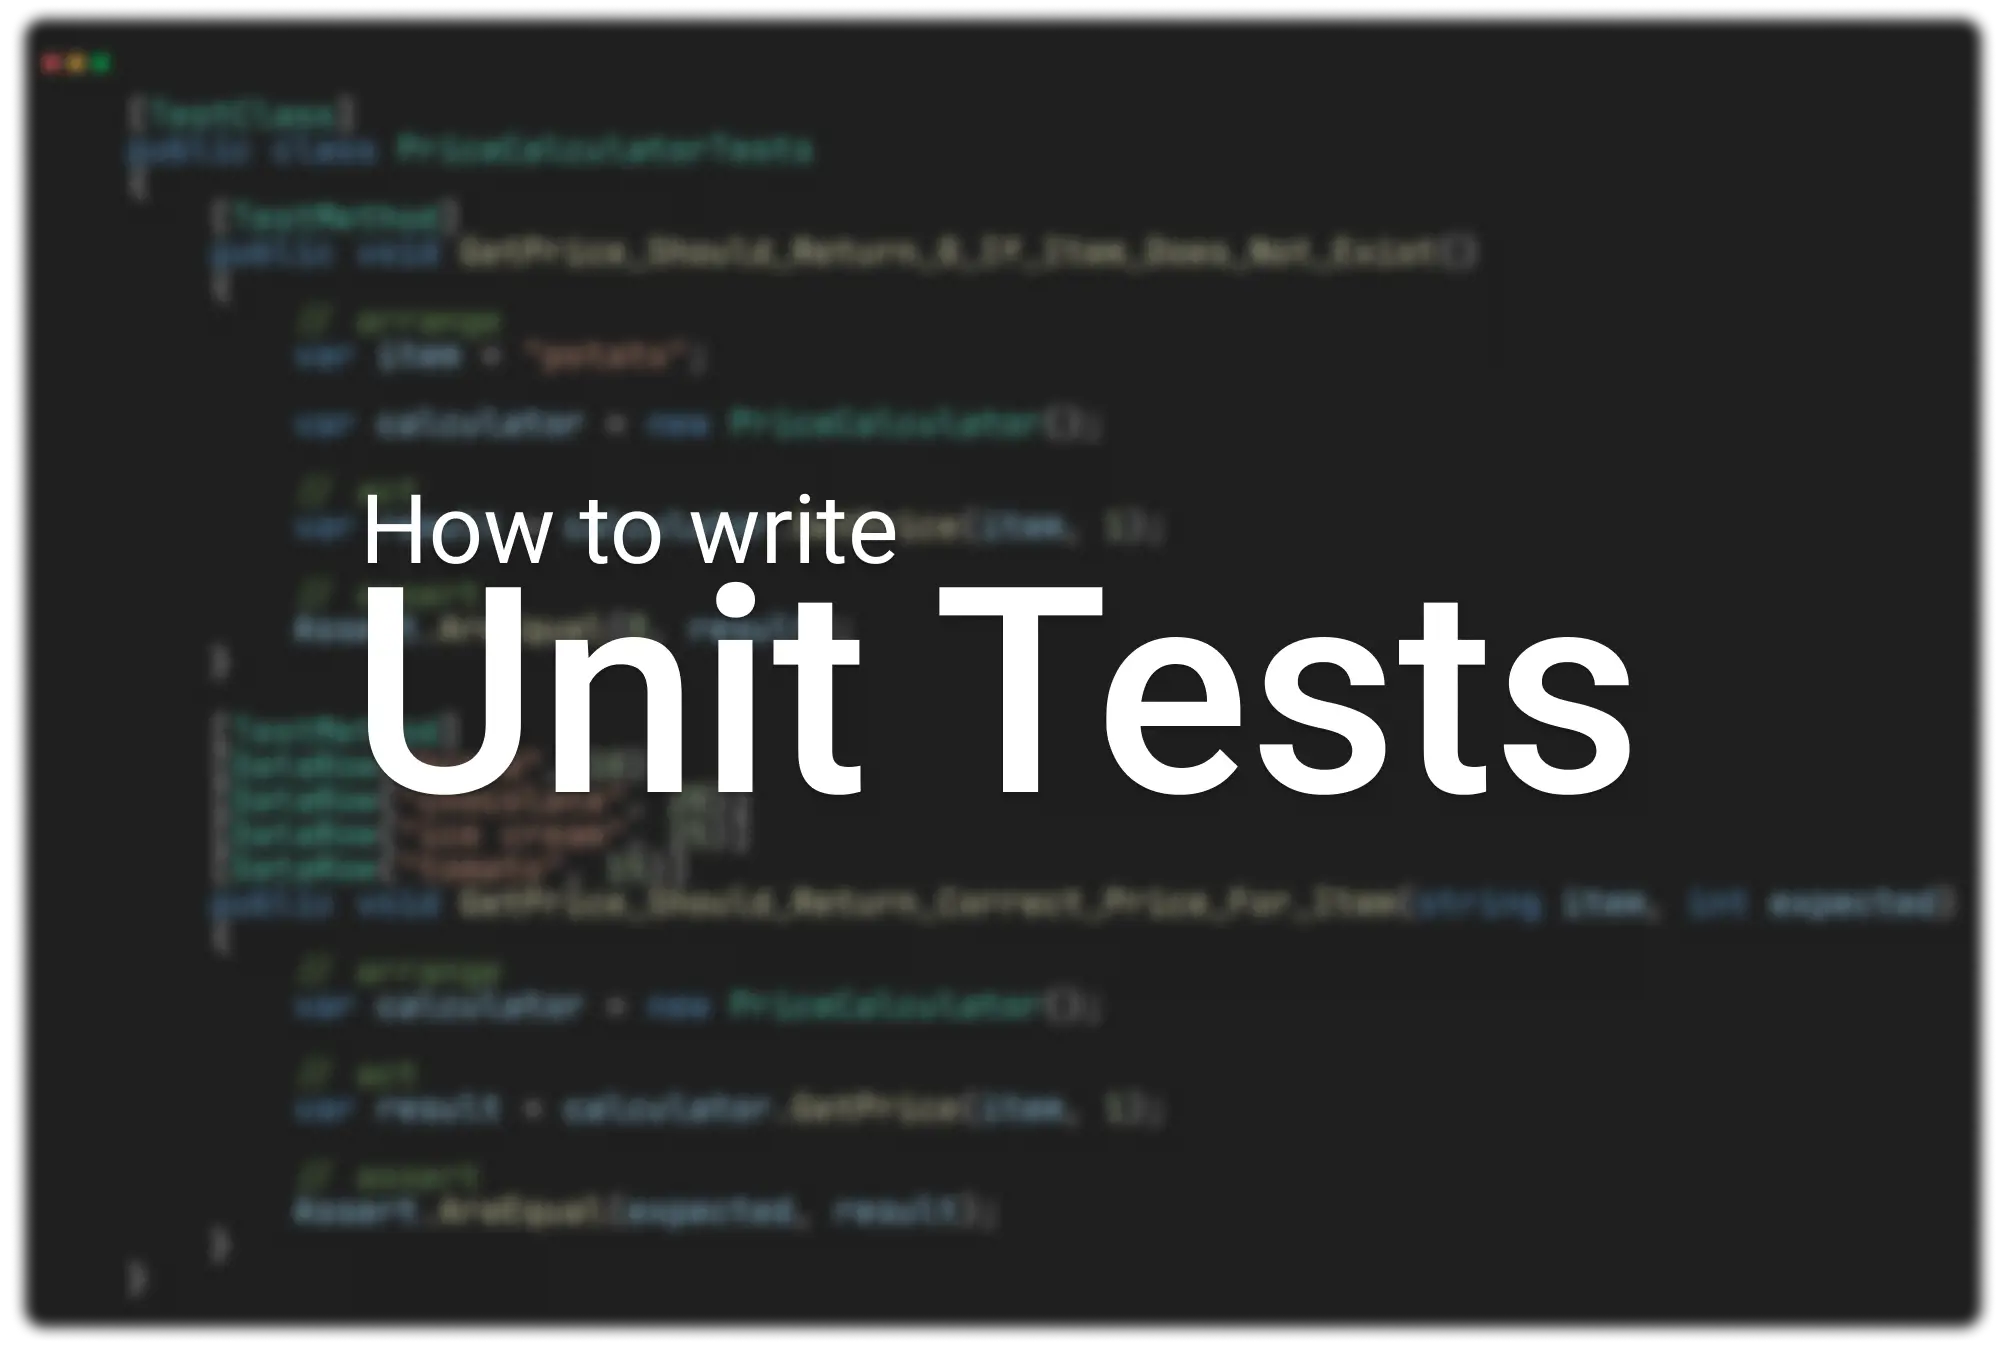 Title image of How to write unit tests